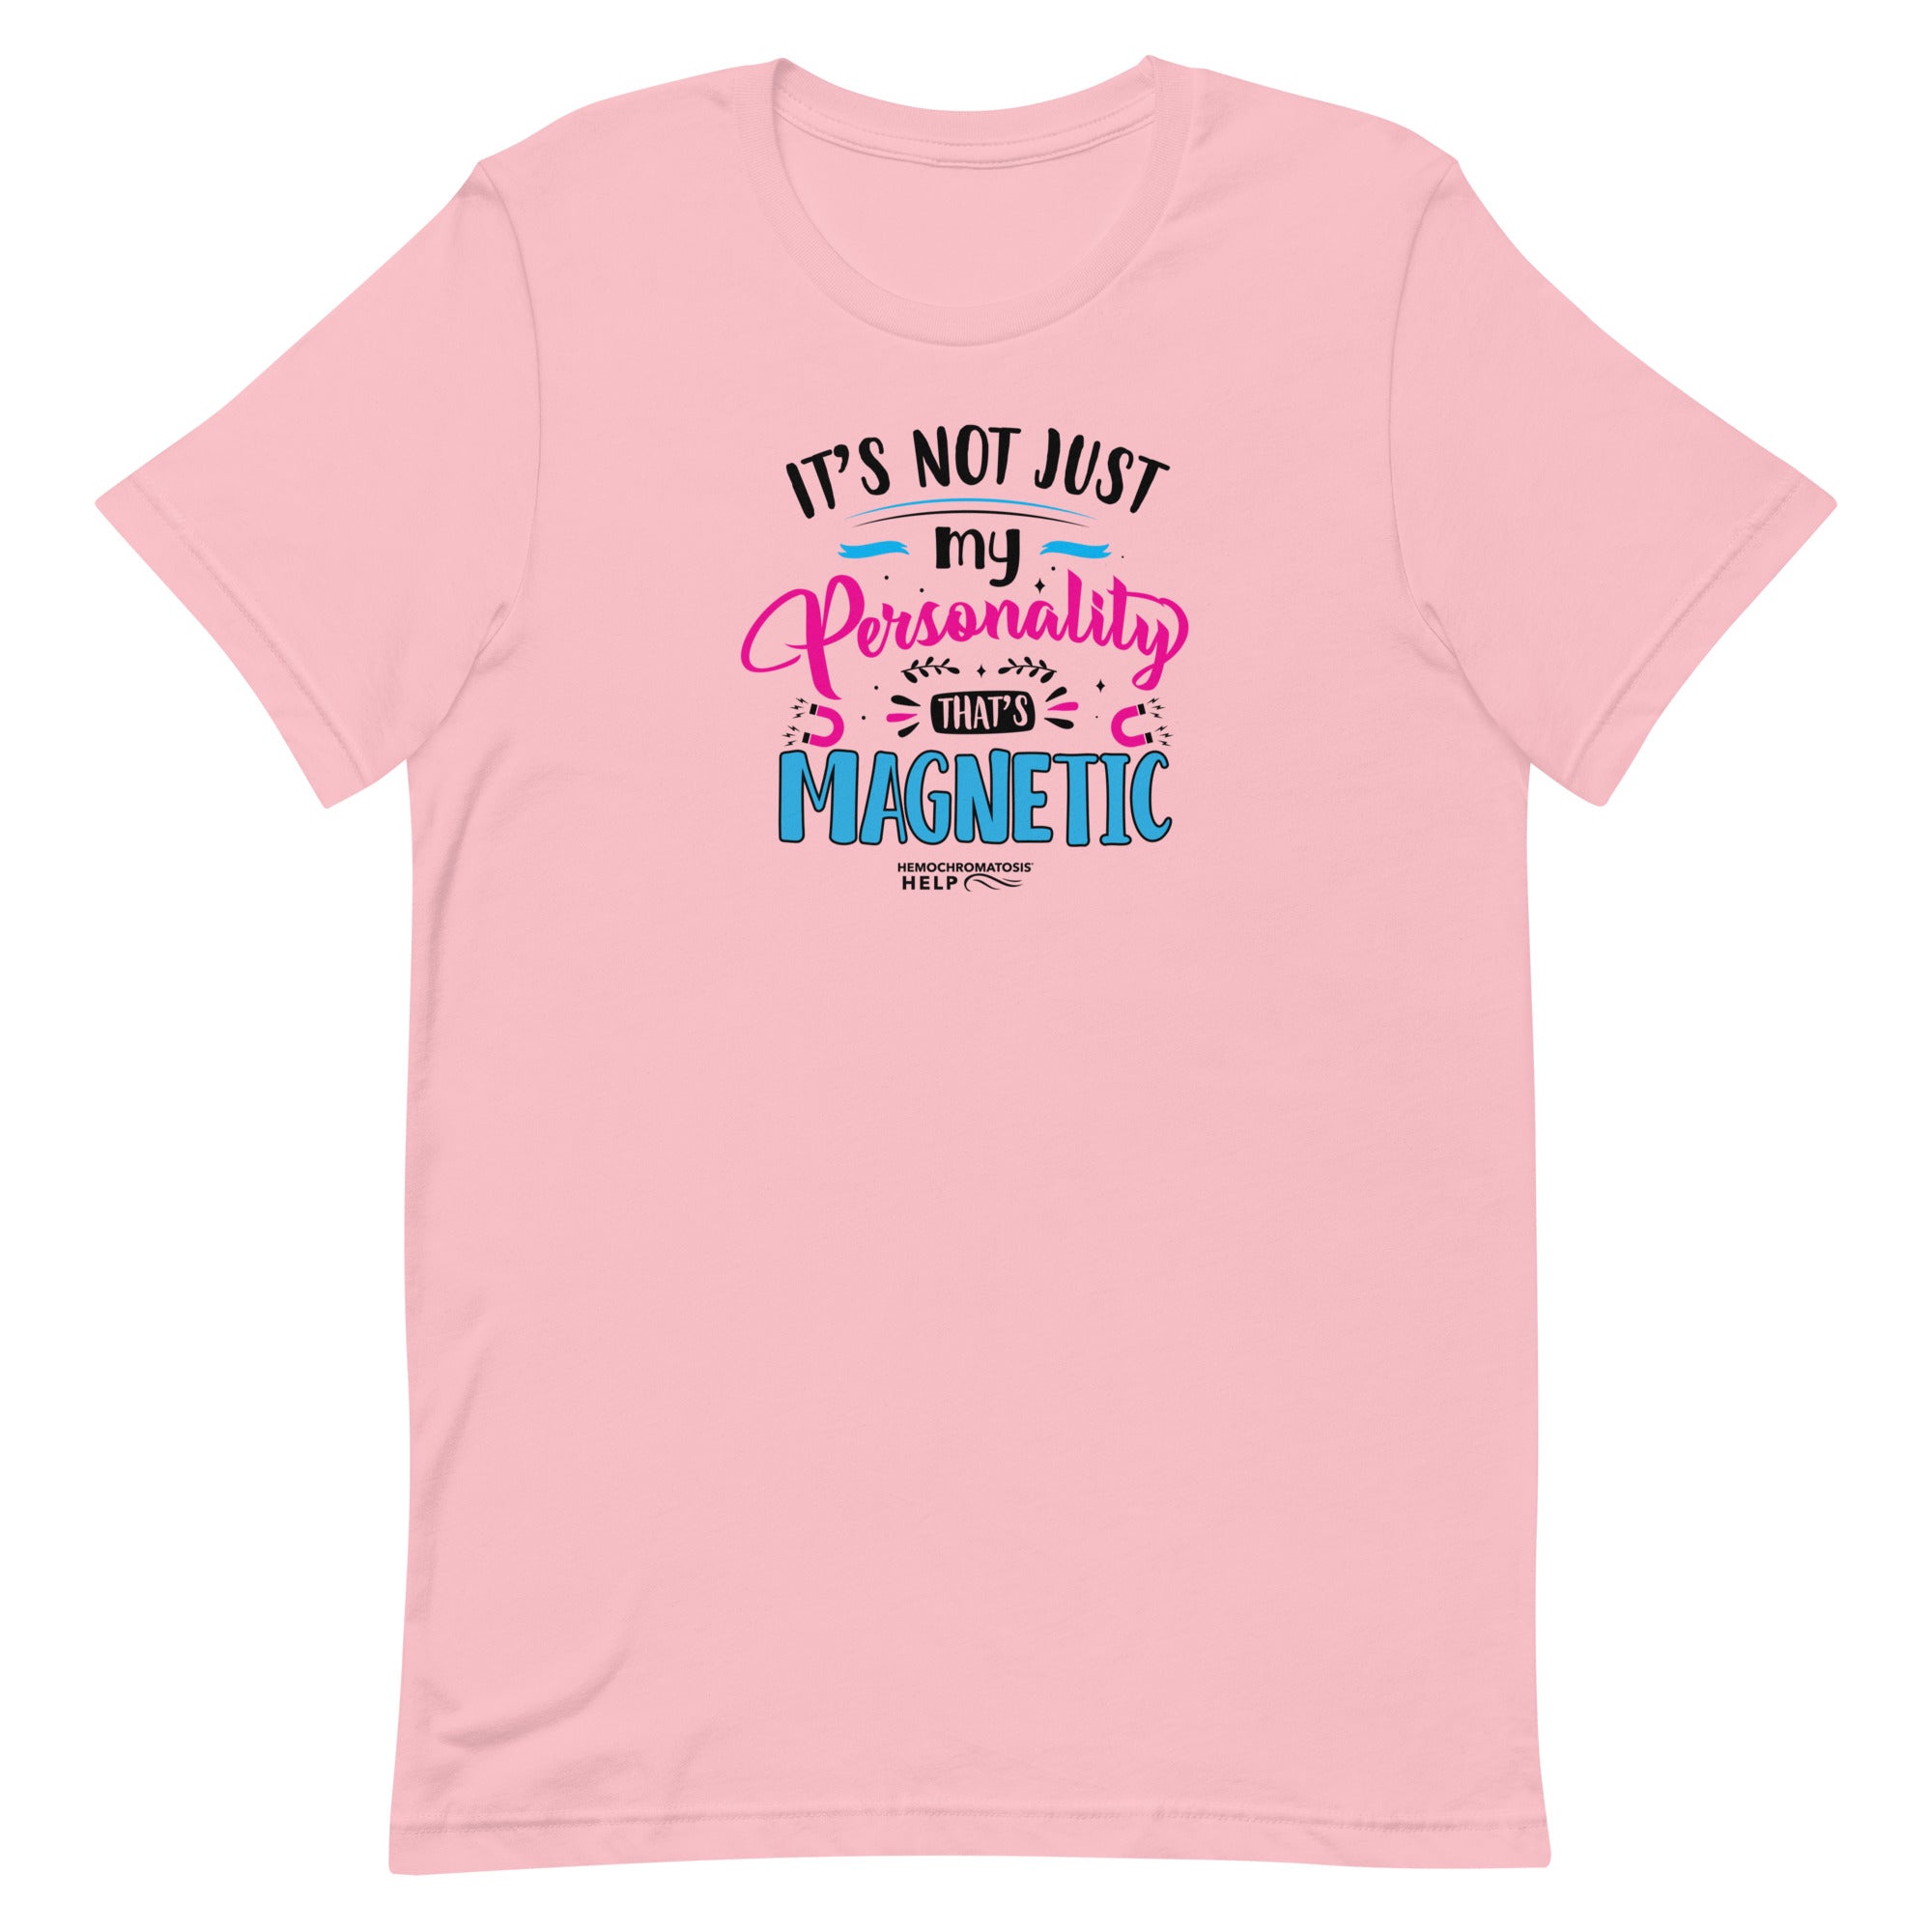 "It's Not Just My Personality That's Magnetic" Hemochromatosis Awareness Premium Short Sleeve T-Shirt (5 Colors)